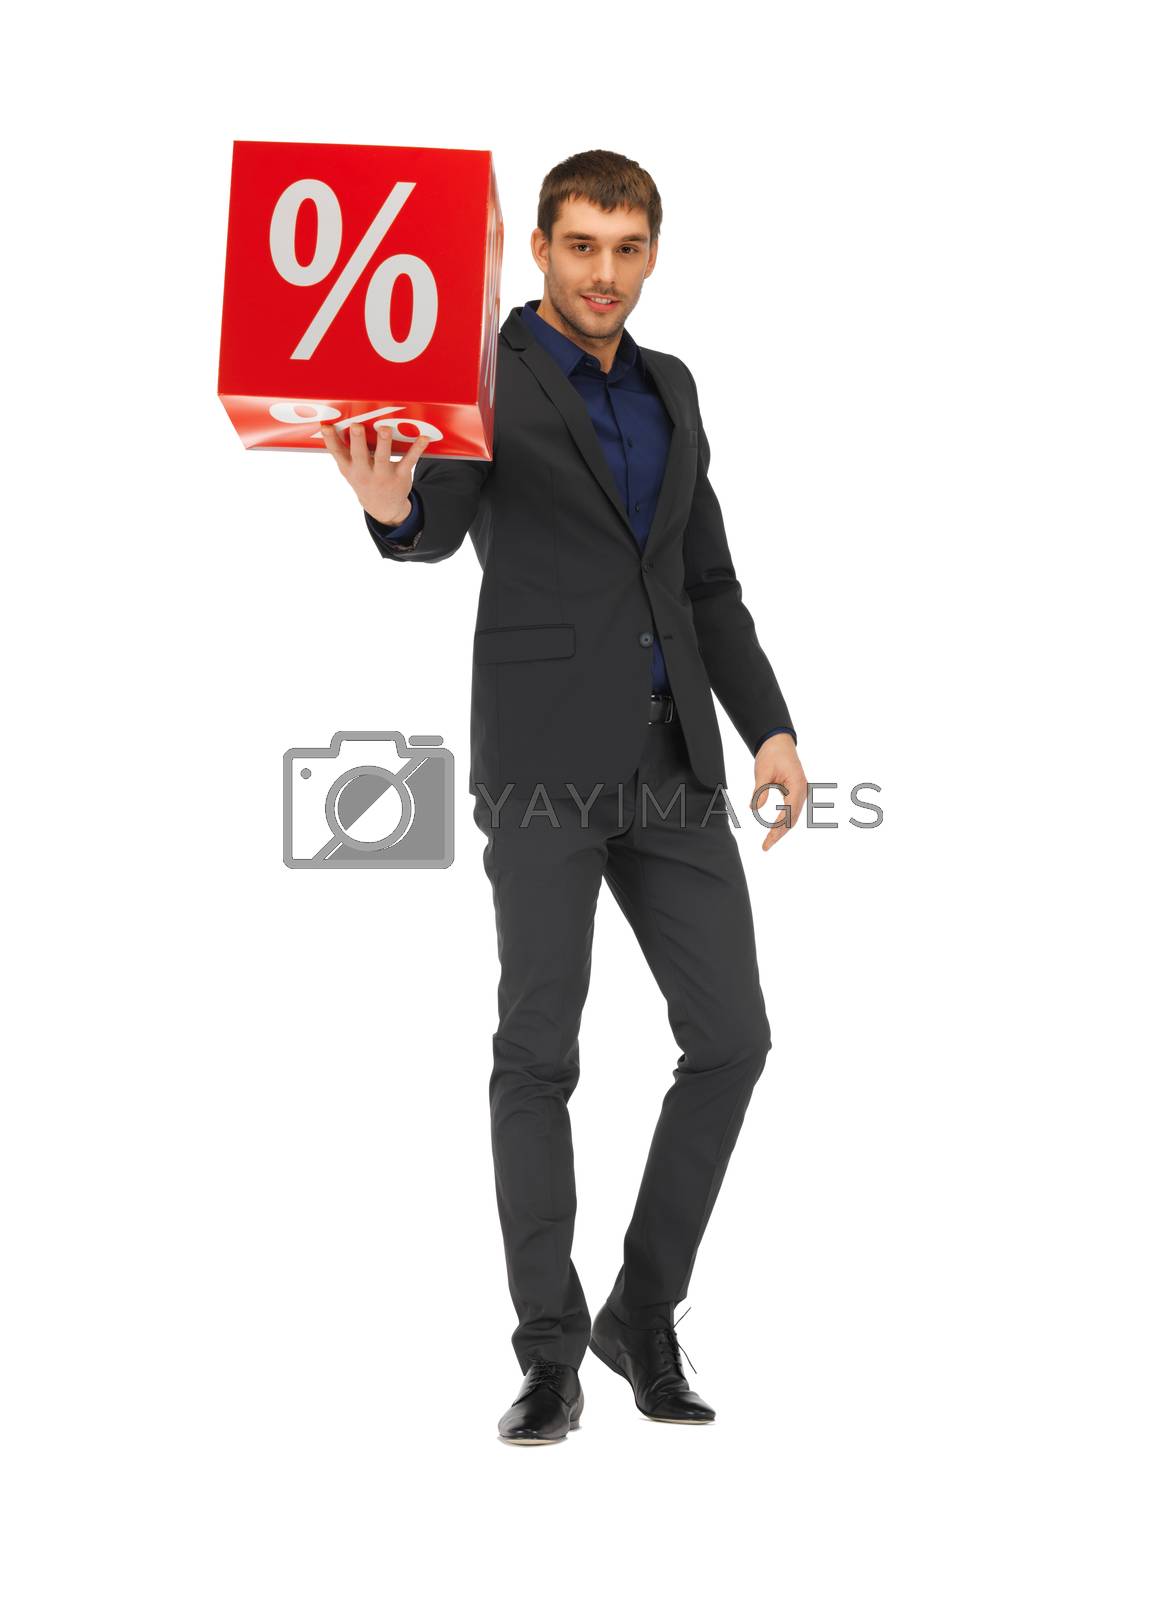 Royalty free image of handsome man in suit with percent sign by dolgachov